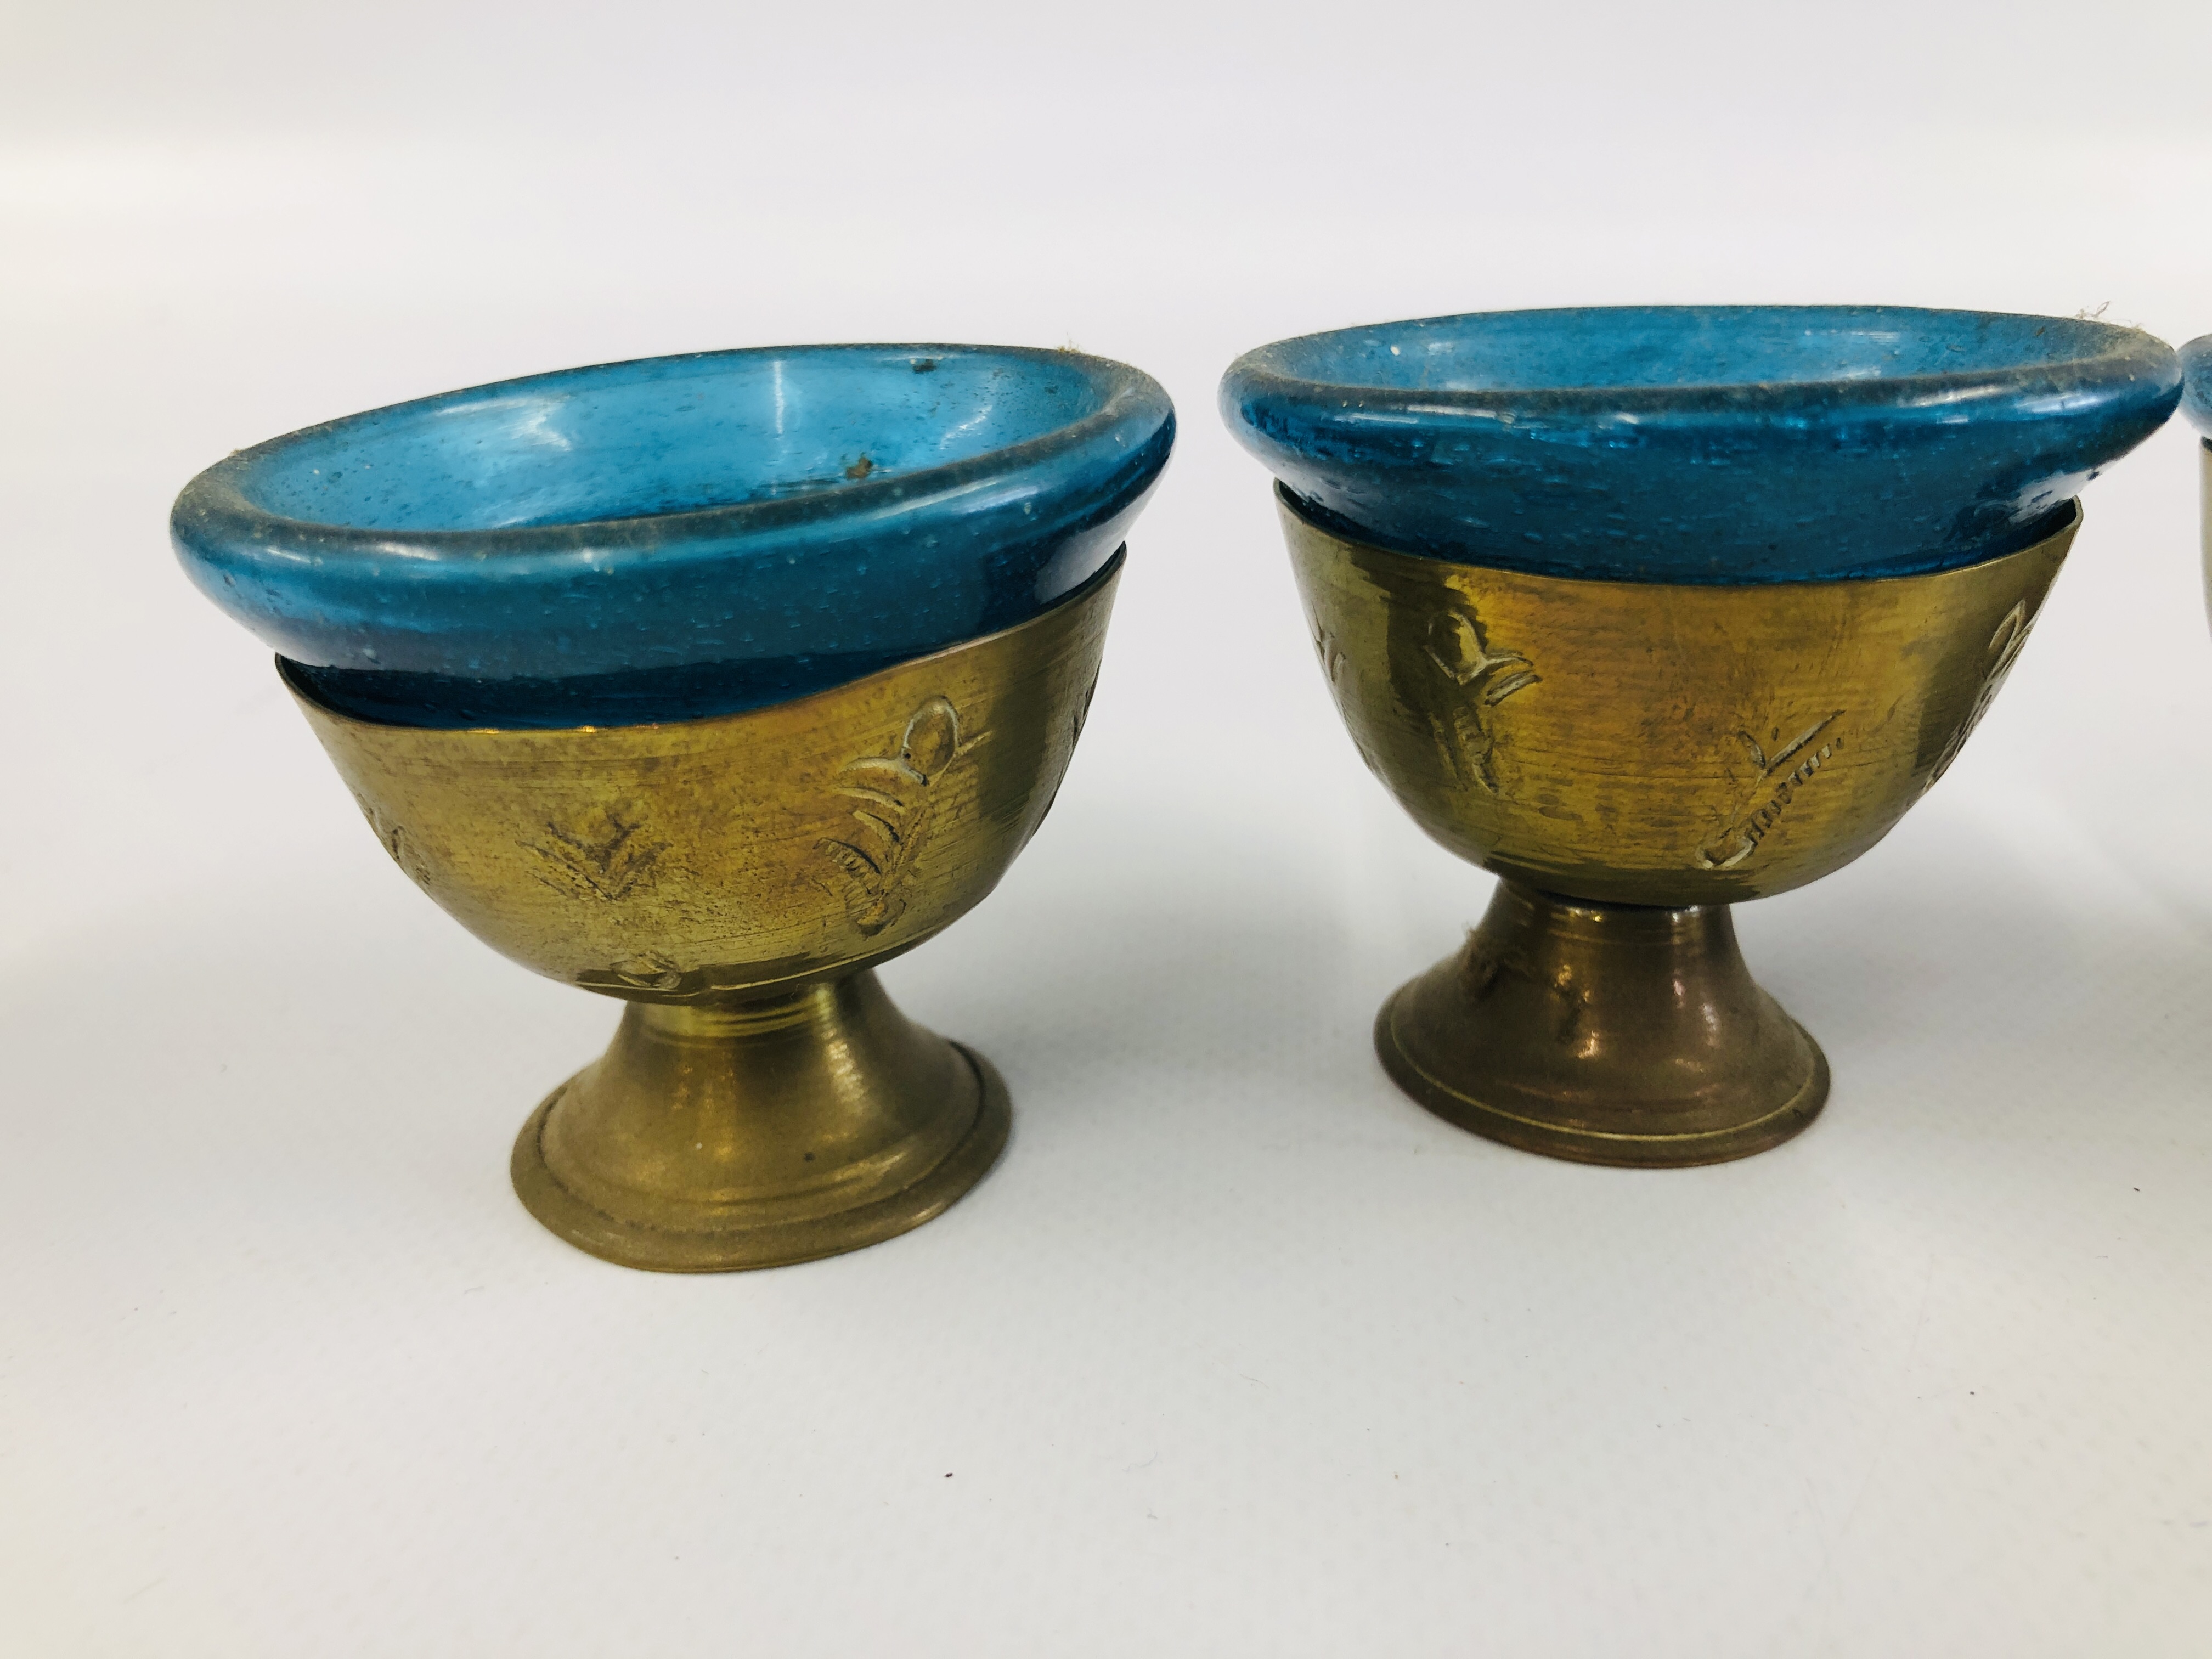 A SET OF SIX MIDDLE EASTERN BRASS GOBLET VESSELS WITH BLUE GLASS LINERS. - Image 2 of 11